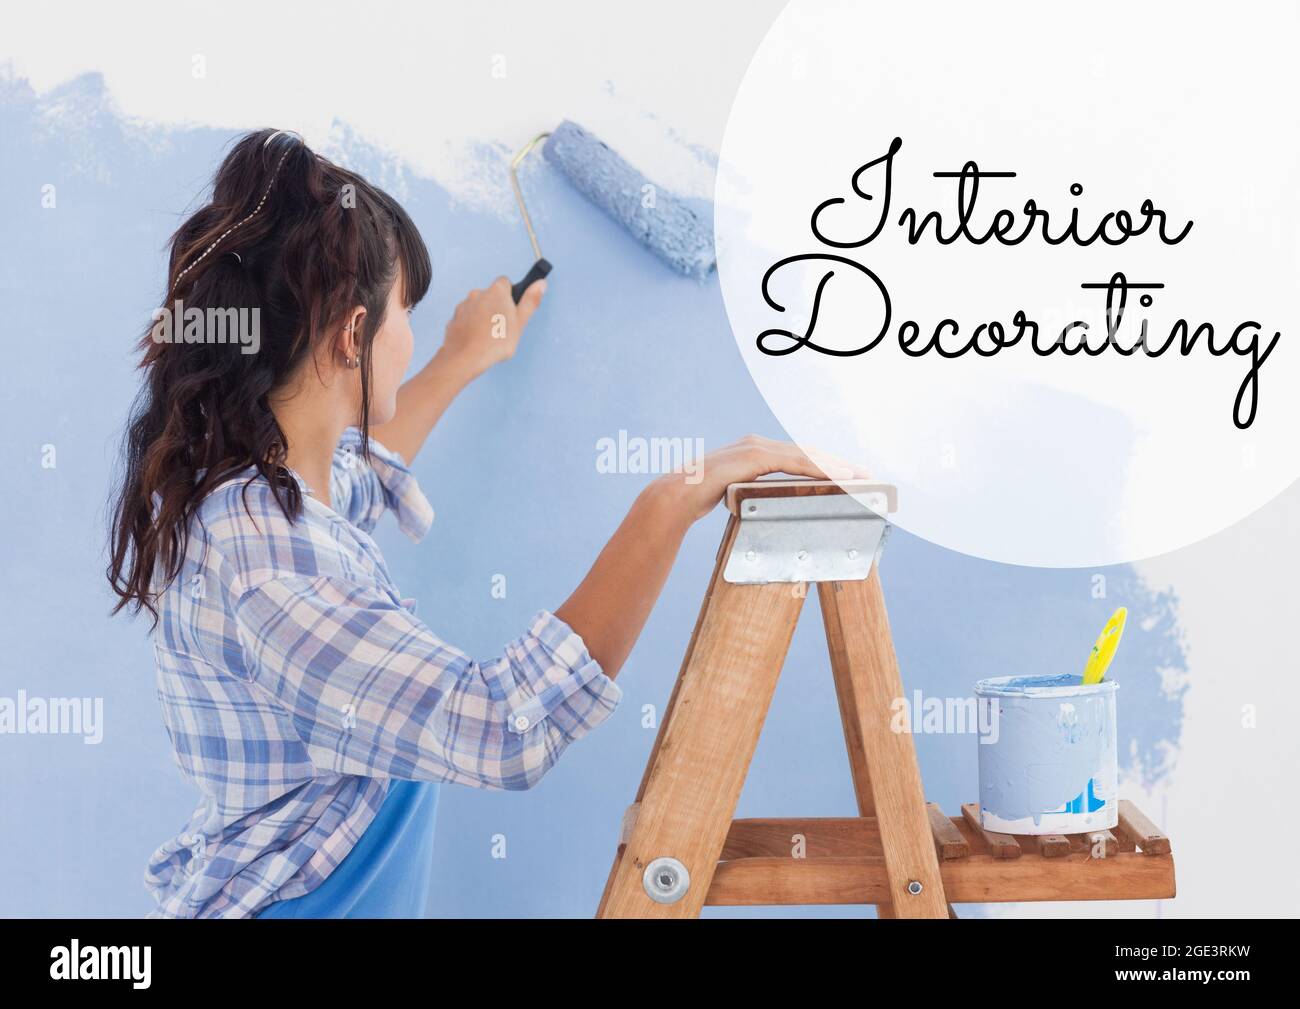 Composition of online crafting text over woman painting wall Stock Photo